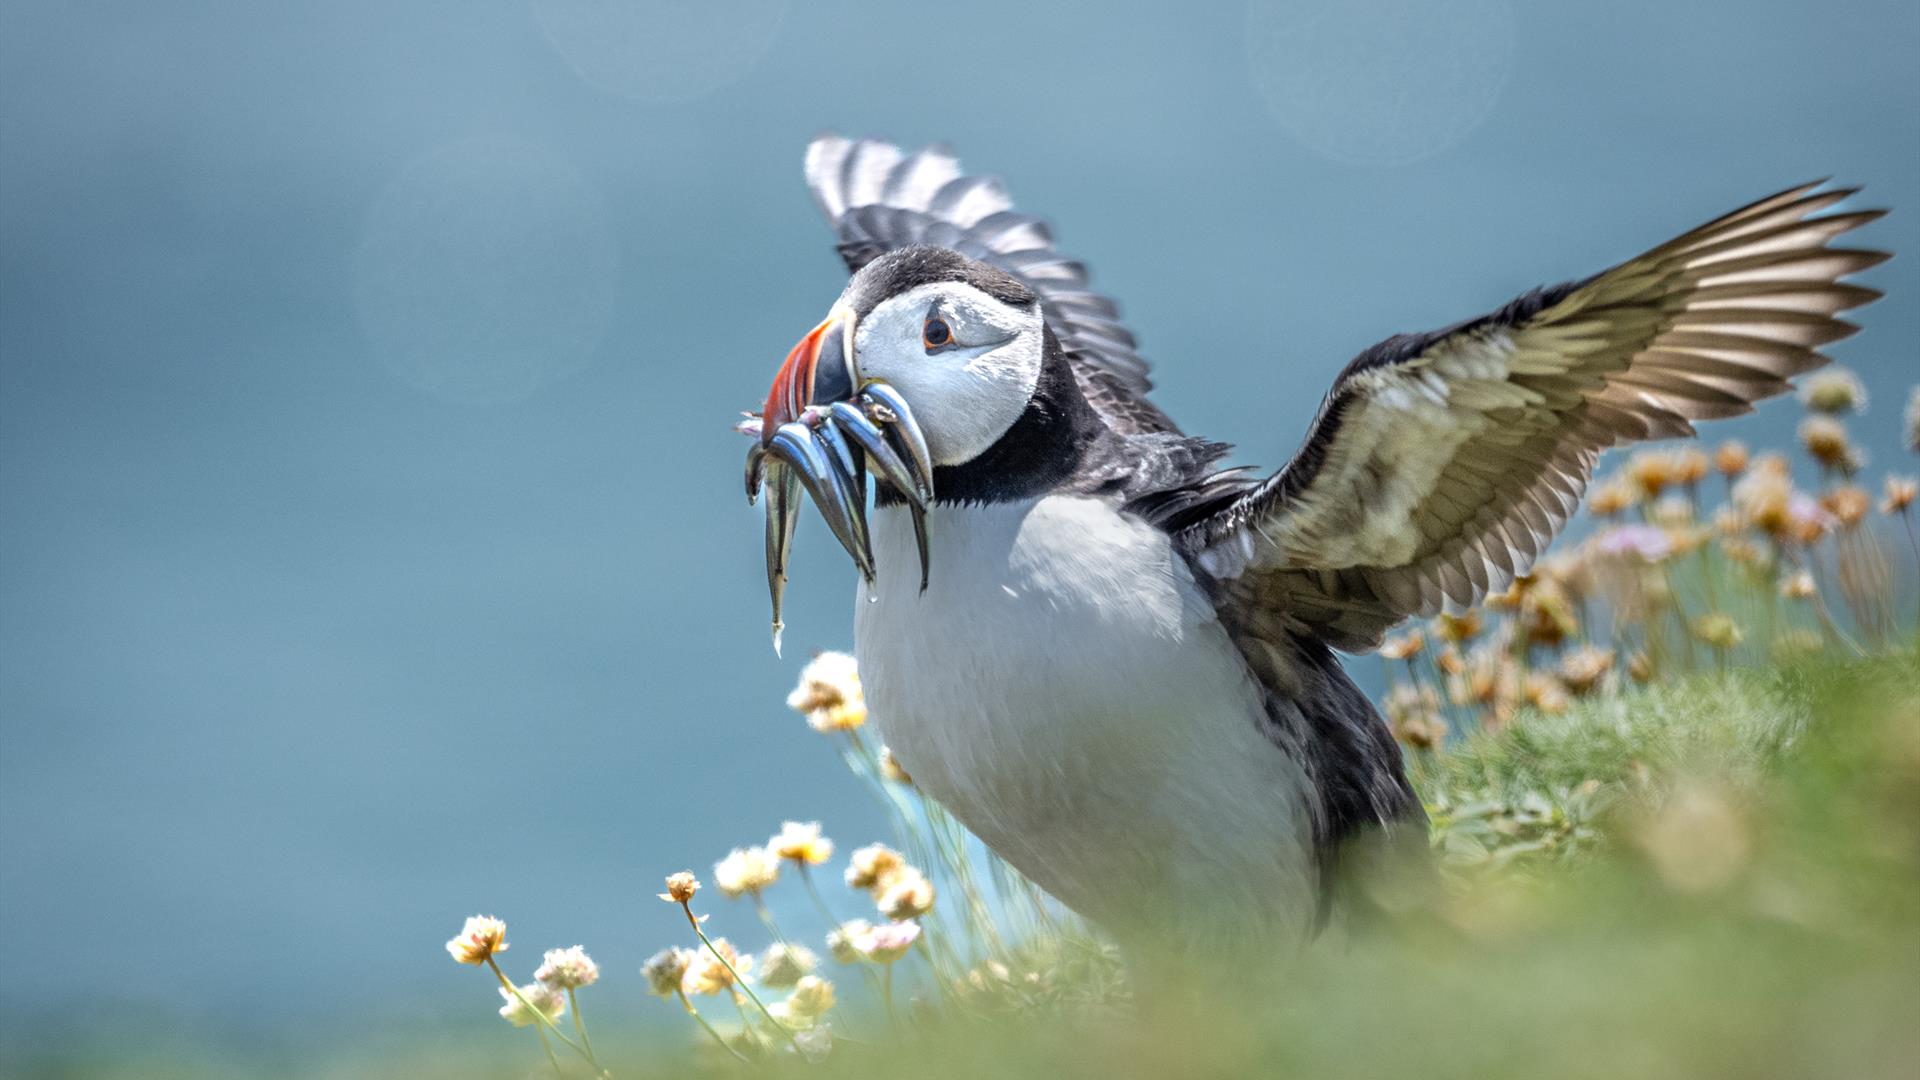 Puffin Landing by Paul McIlwaine